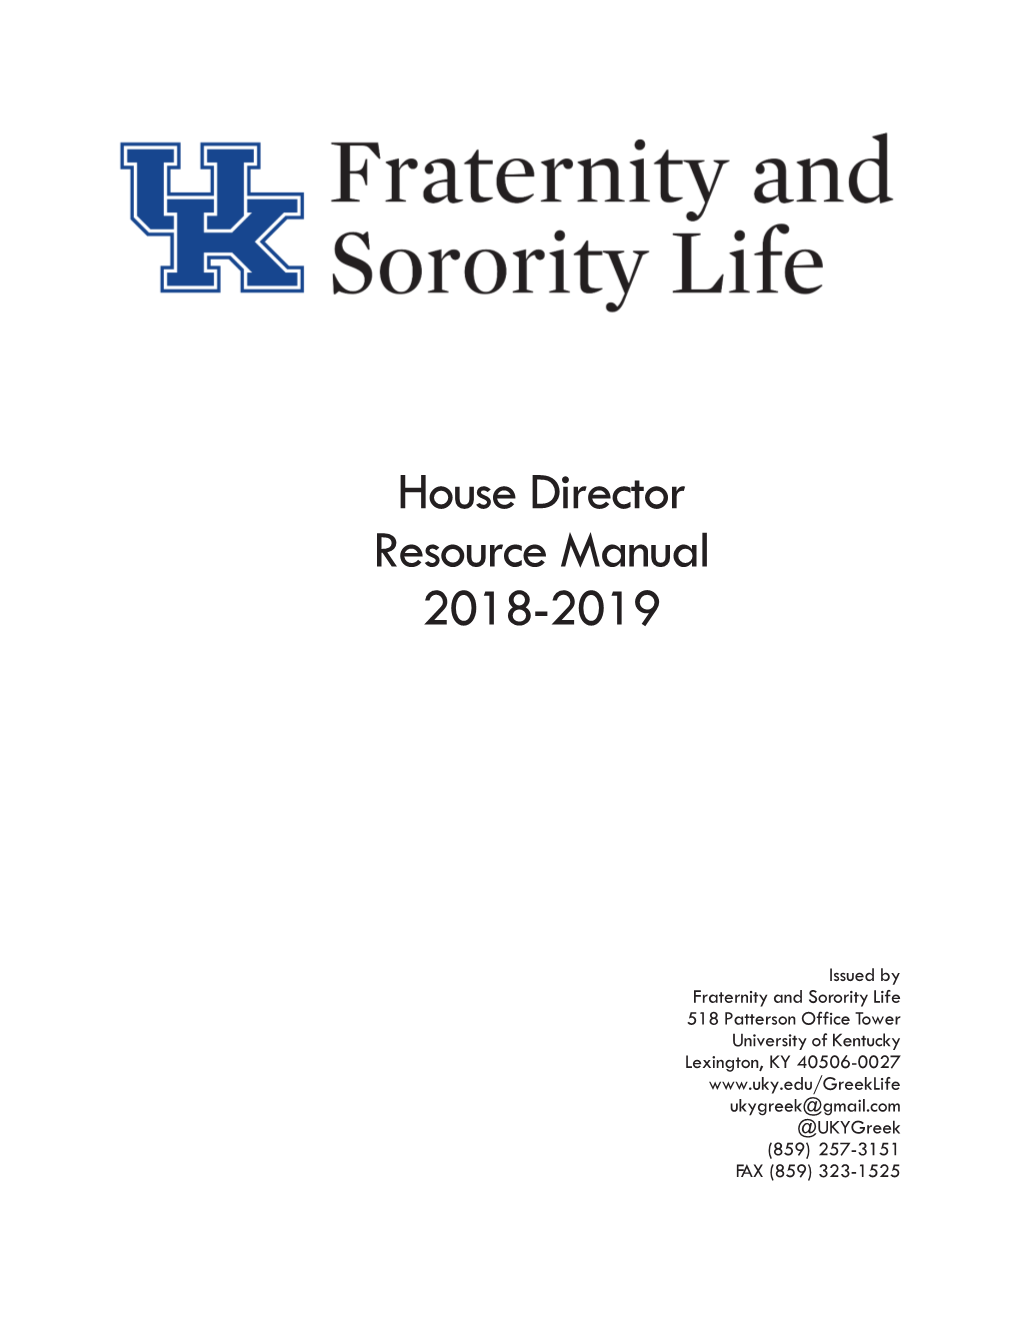 House Director Resource Manual 2018-2019